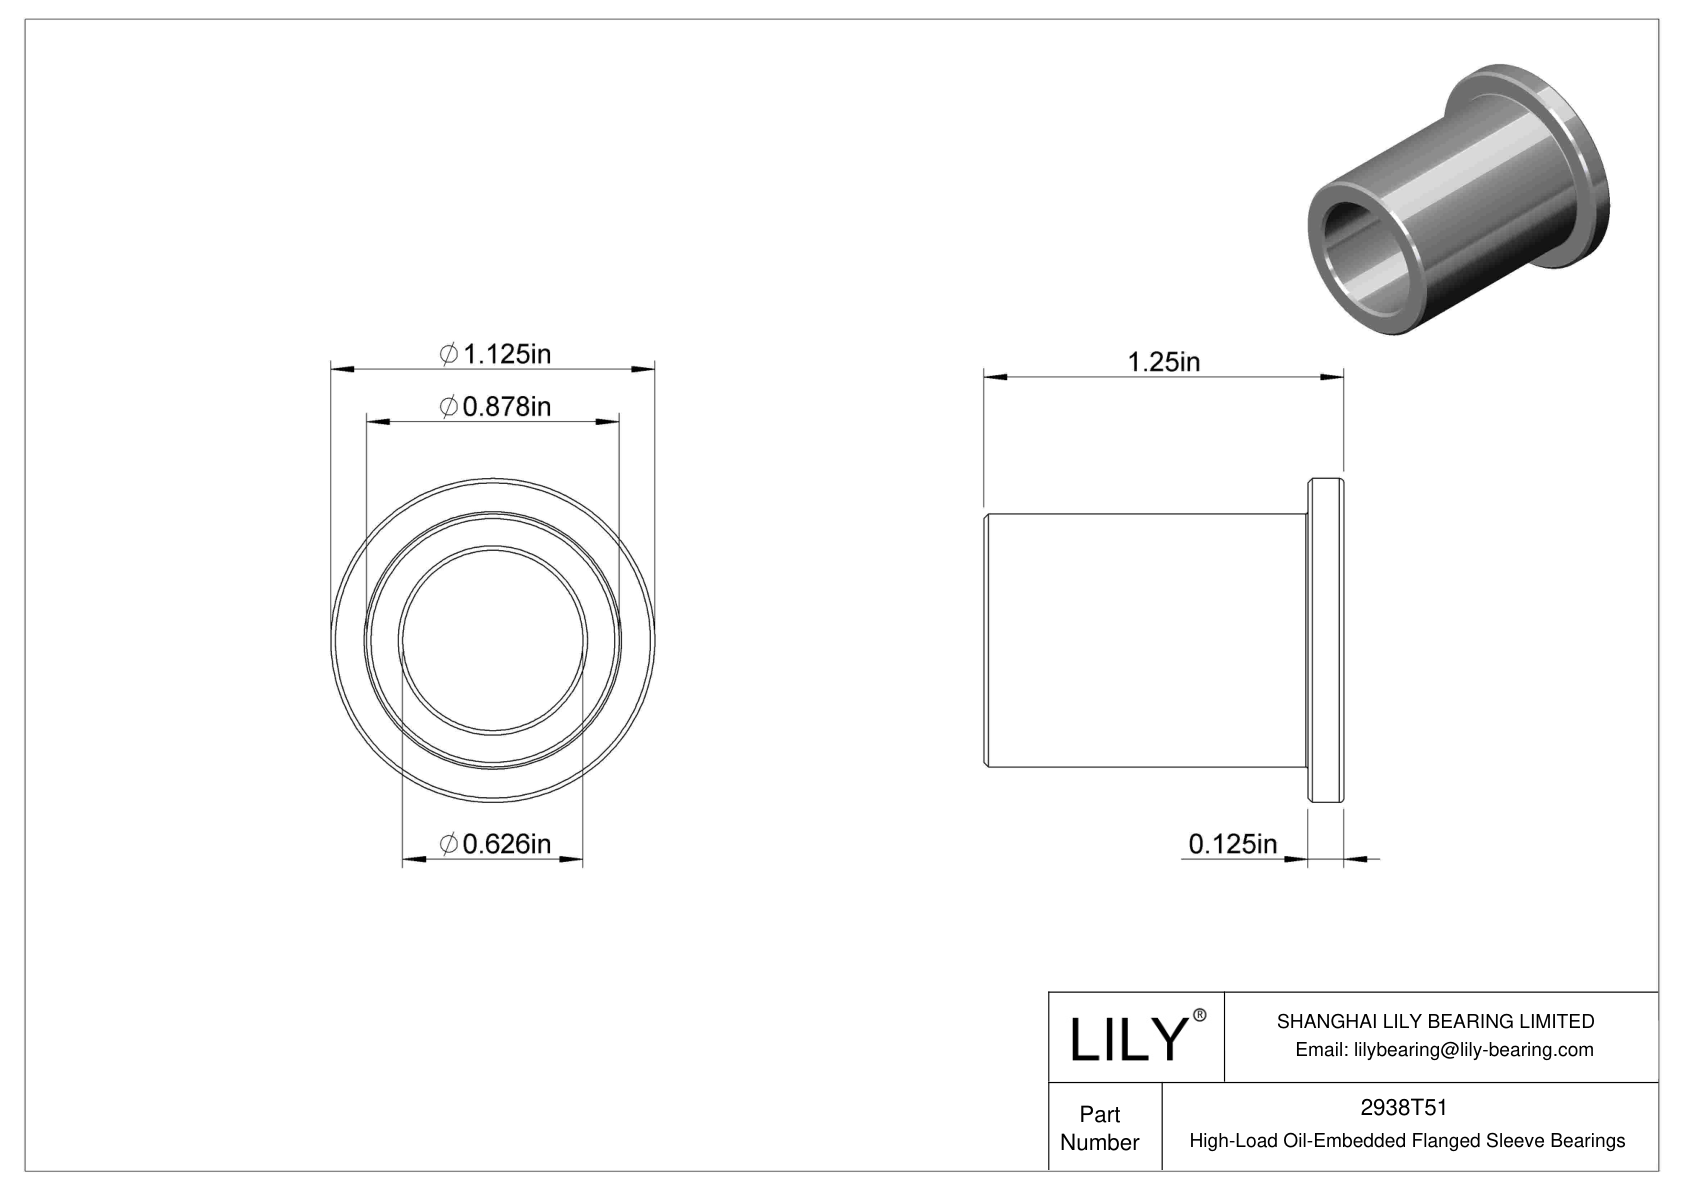 CJDITFB High-Load Oil-Embedded Flanged Sleeve Bearings cad drawing